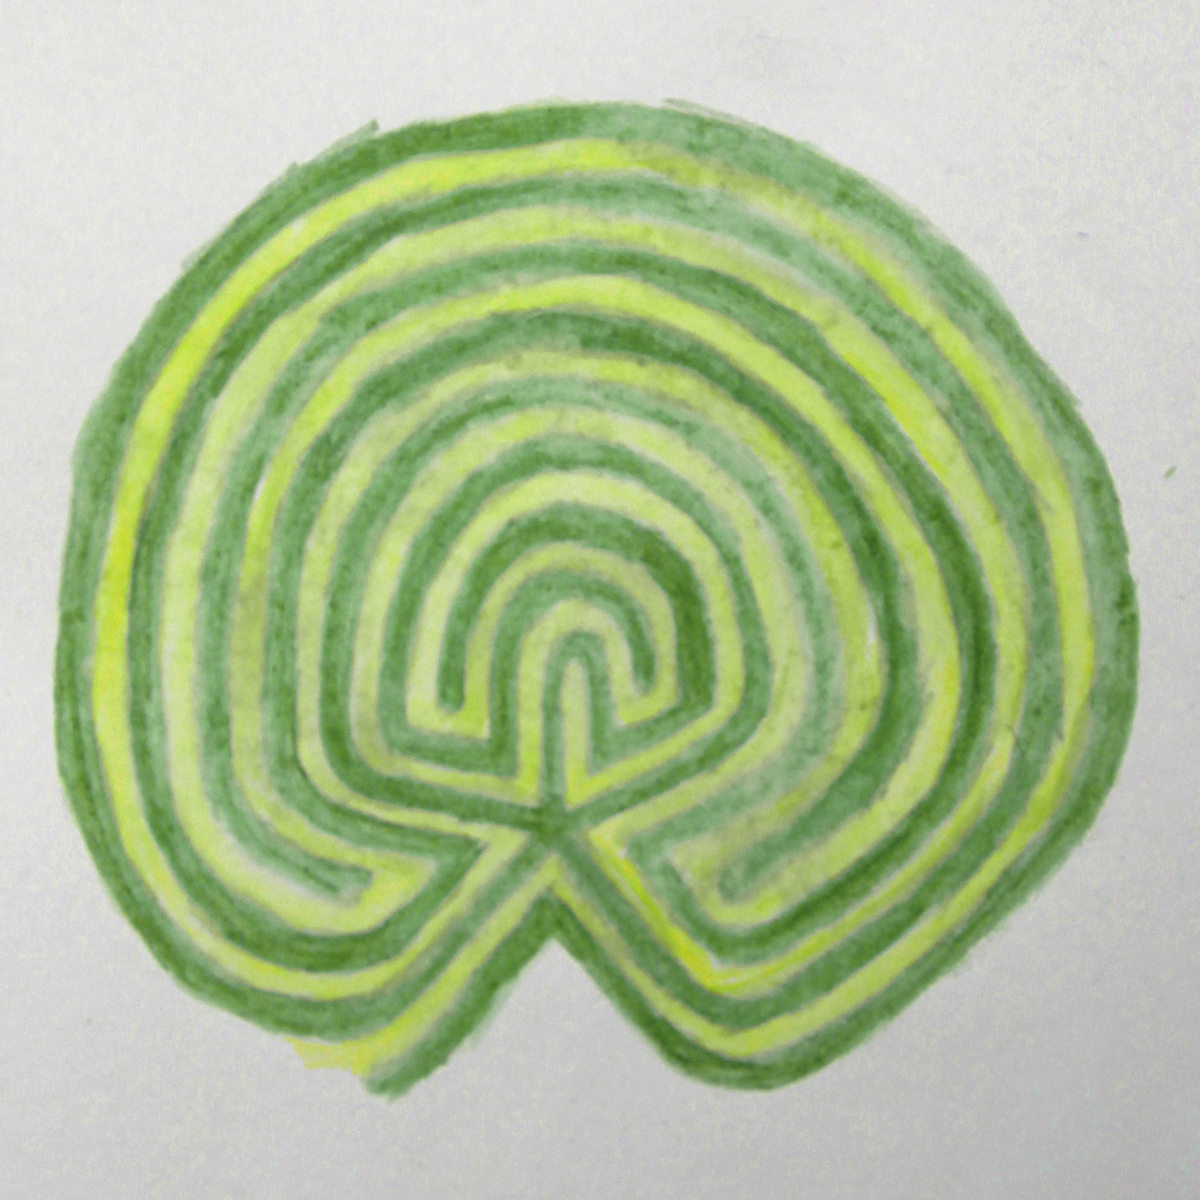 A drawing of a variation on a classic-style labyrinth with a 5-point centre, drawn in thick green lines with a light green-yellow inner path. The pencil marks have been wet to give a watercolour appearance.